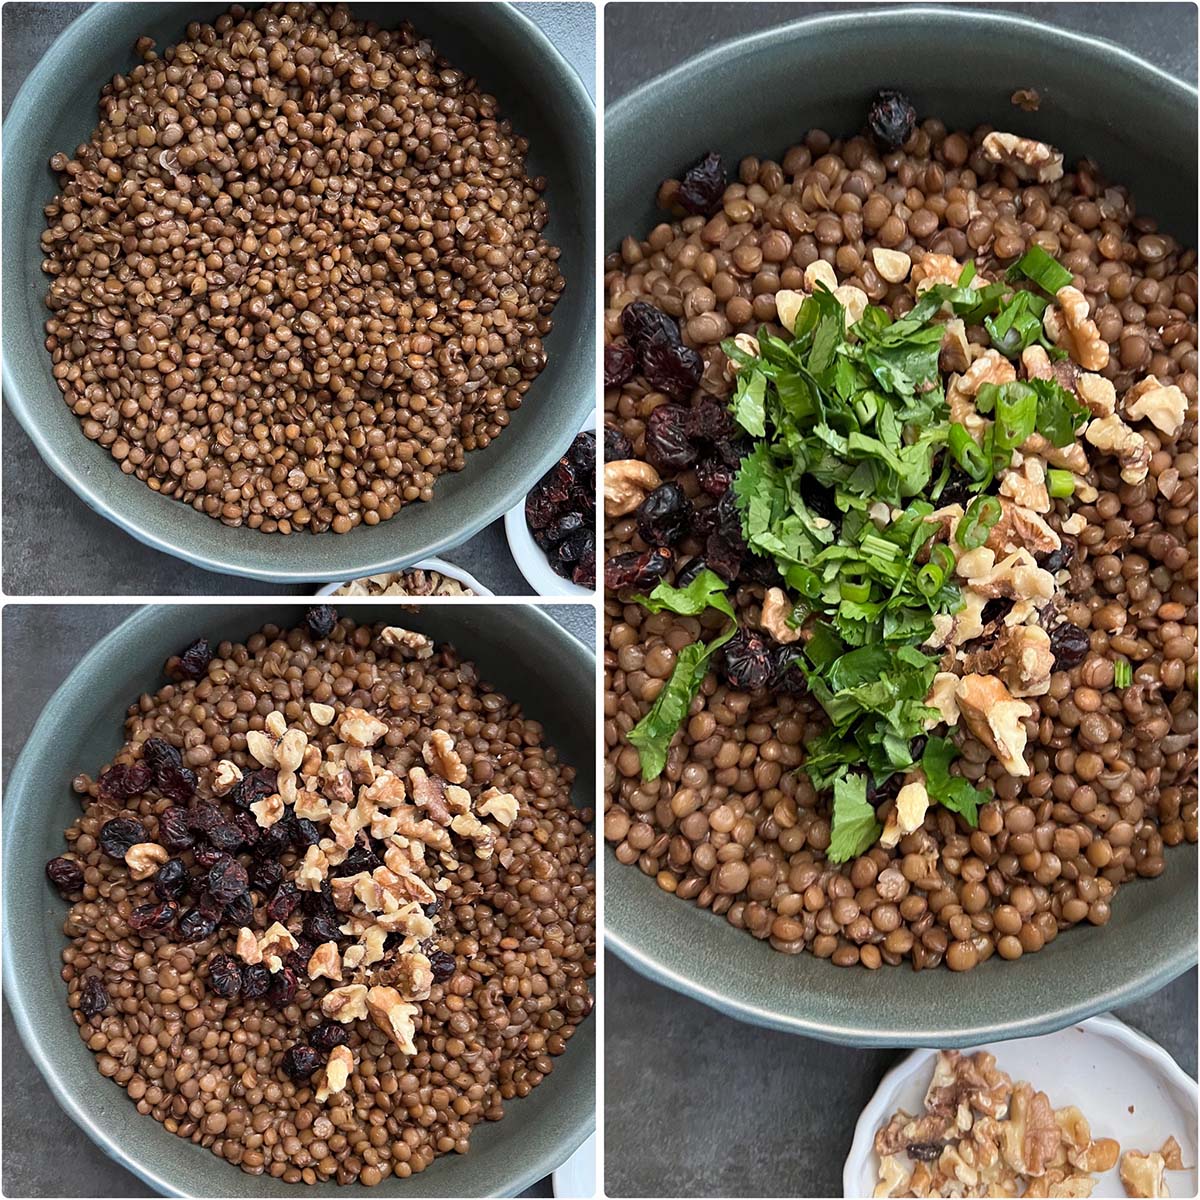 3 panel photos showing the assembling of lentil salad with cranberries.